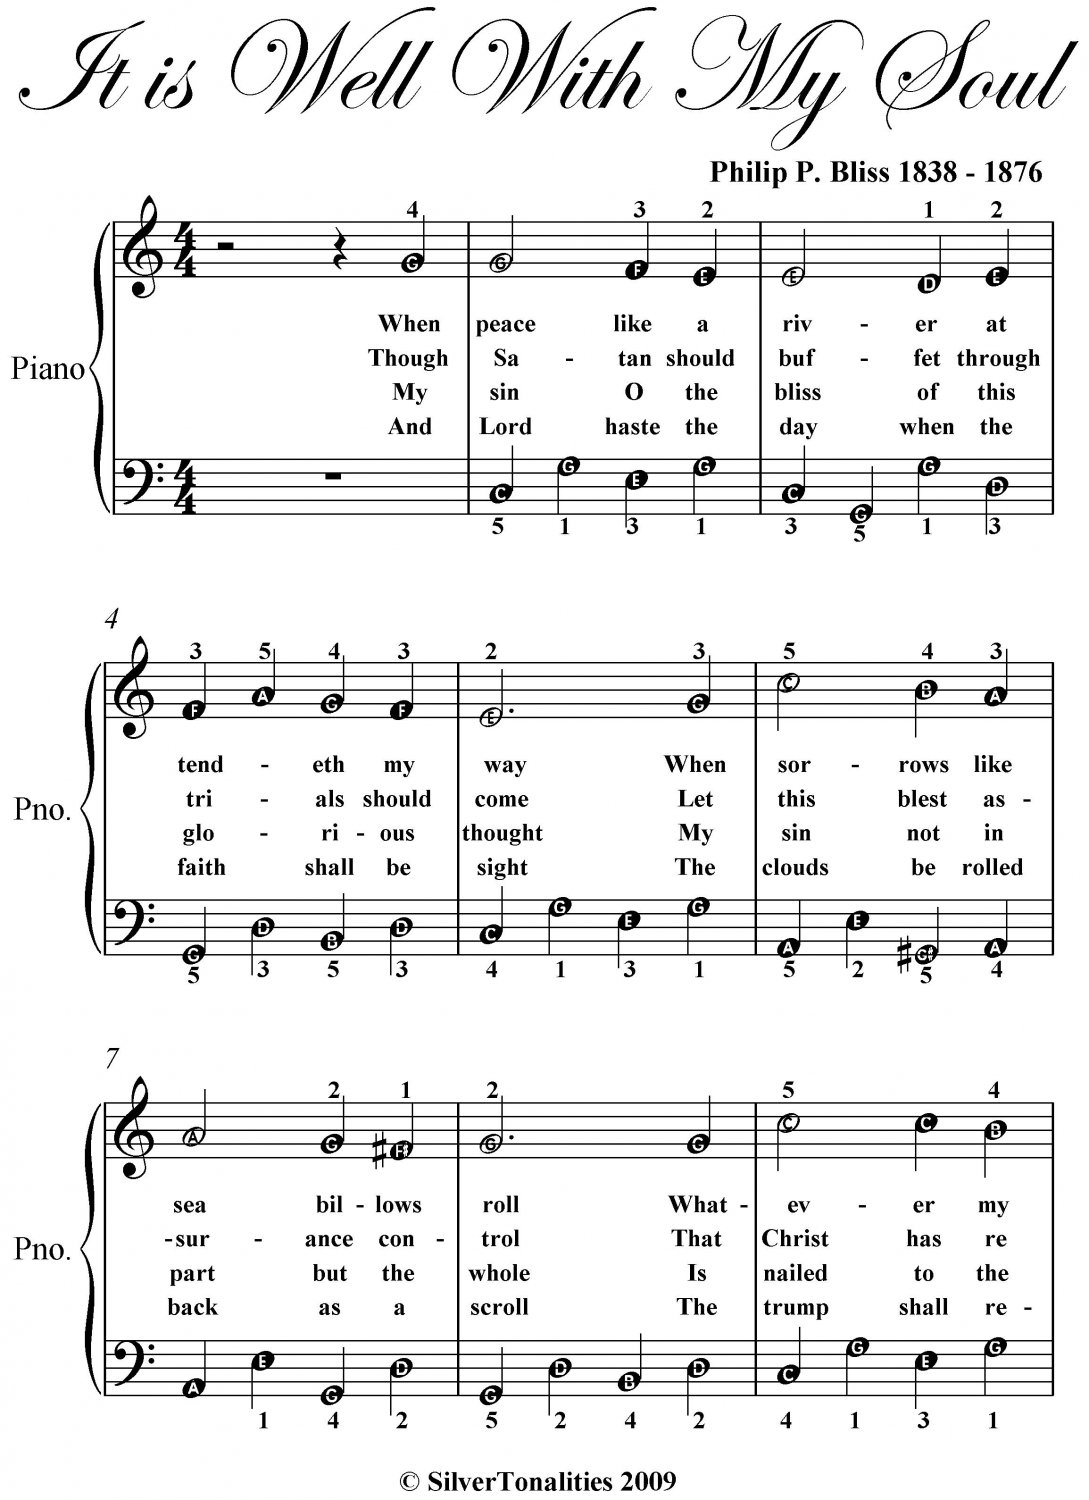 printable-it-is-well-with-my-soul-sheet-music-printable-word-searches